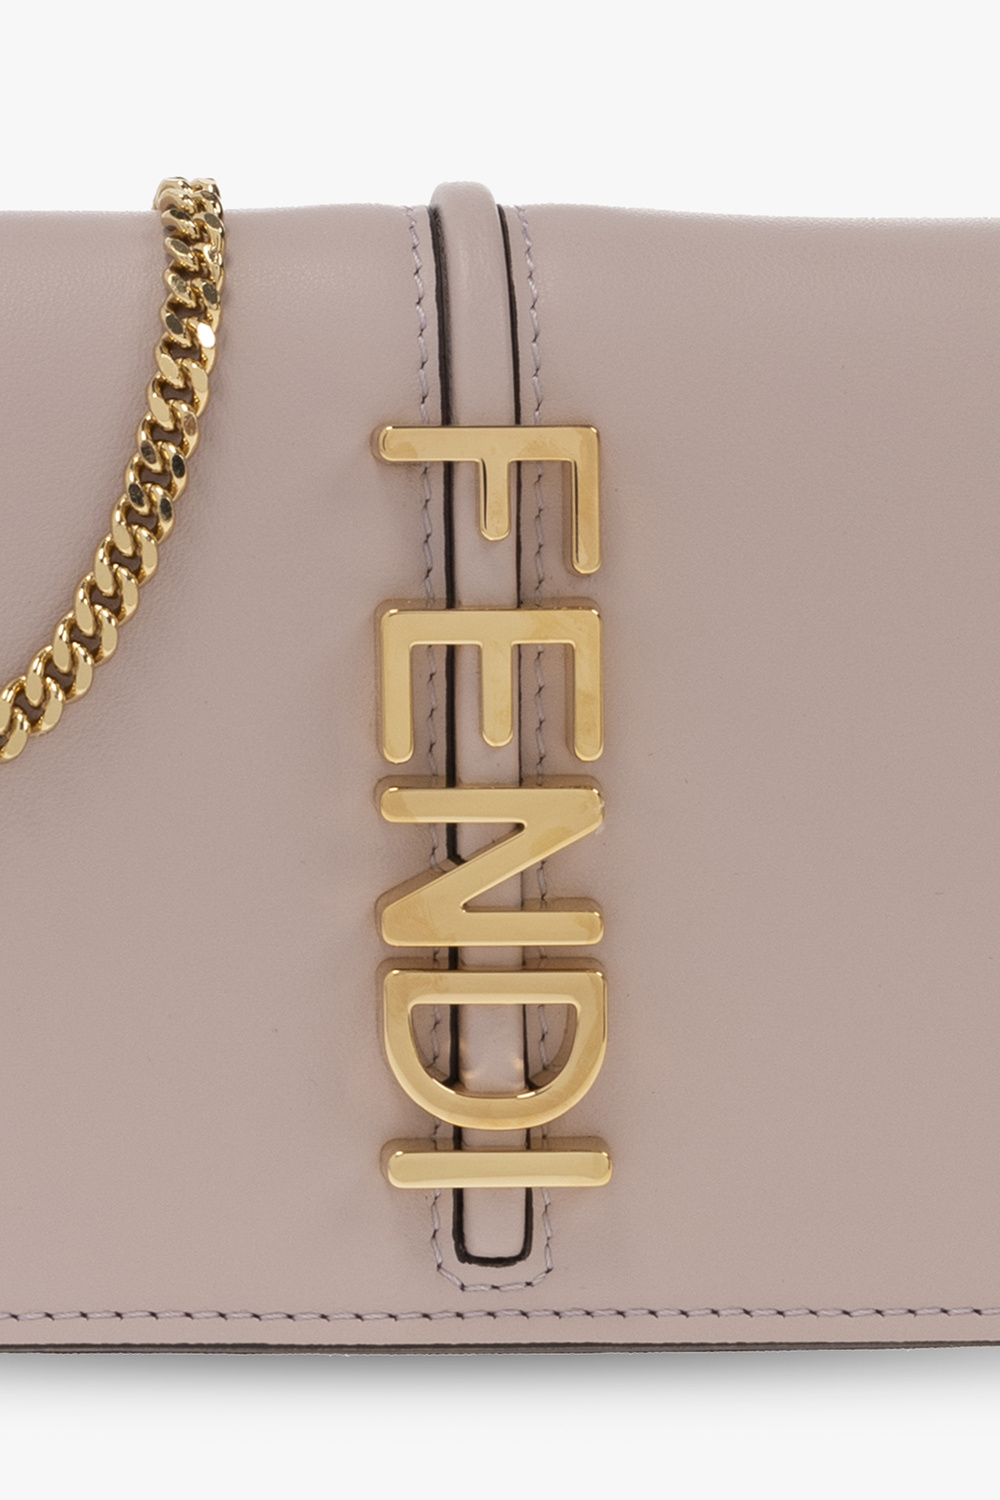 Fendi Fendigraphy Leather Chain Wallet (Wallets and Small Leather Goods, Wallets)